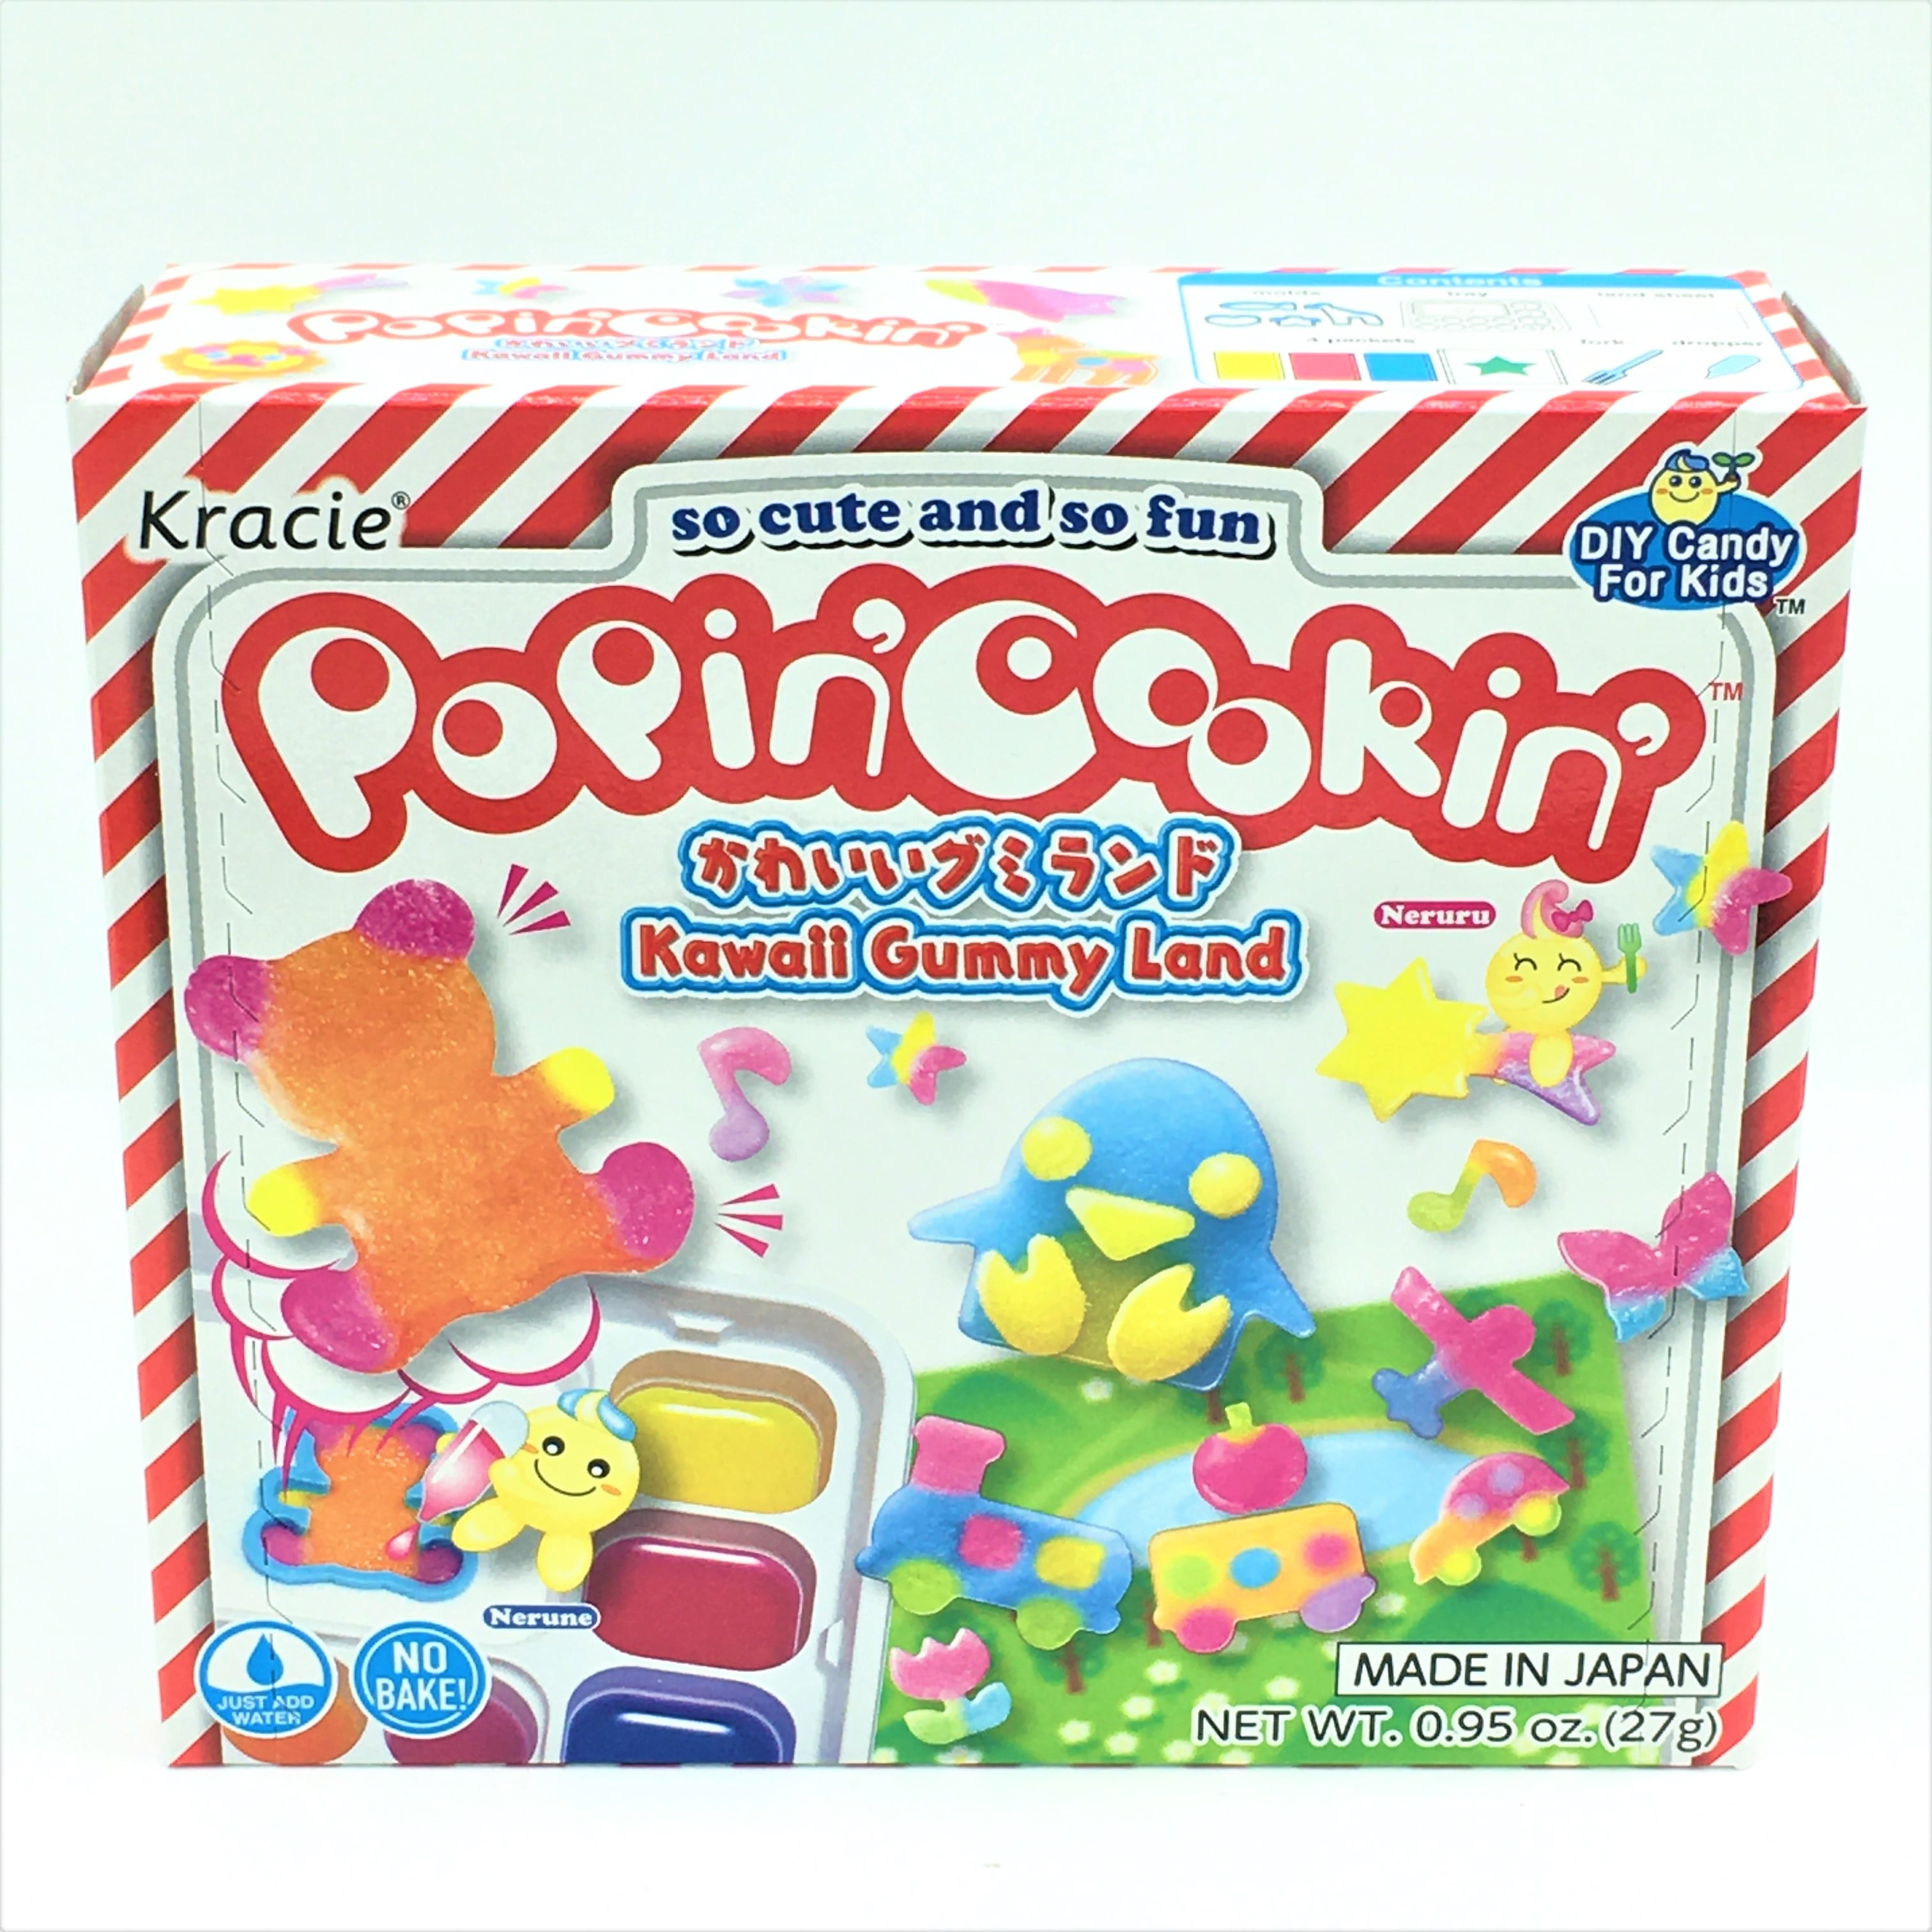 Making Japanese Gummy Candy Using a Kracie Popin' Cookin' Kit - Delishably